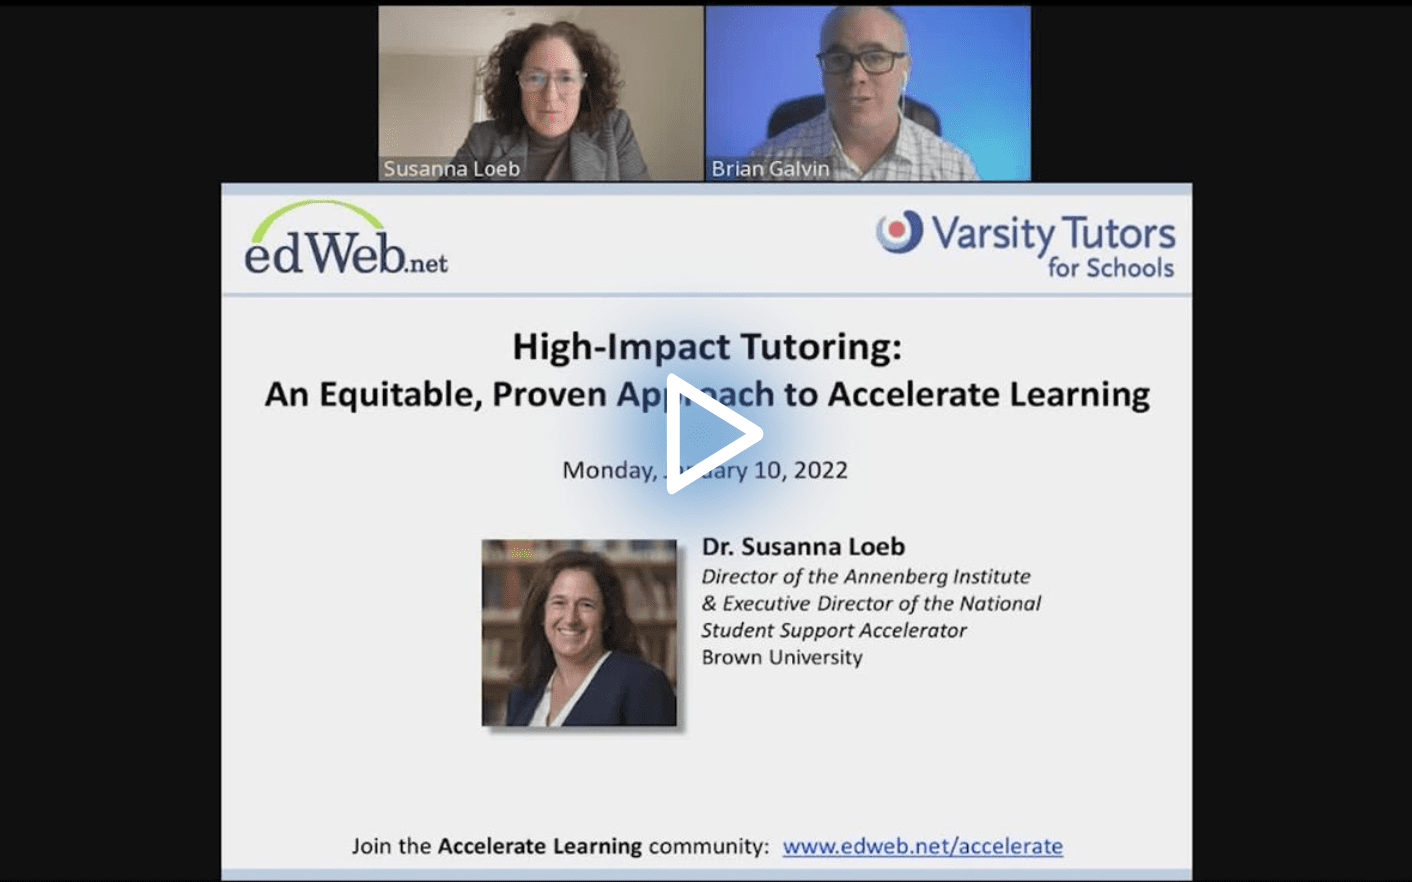 High-Impact Tutoring: An Equitable, Proven Approach to Accelerate Learning edLeader Panel recording link